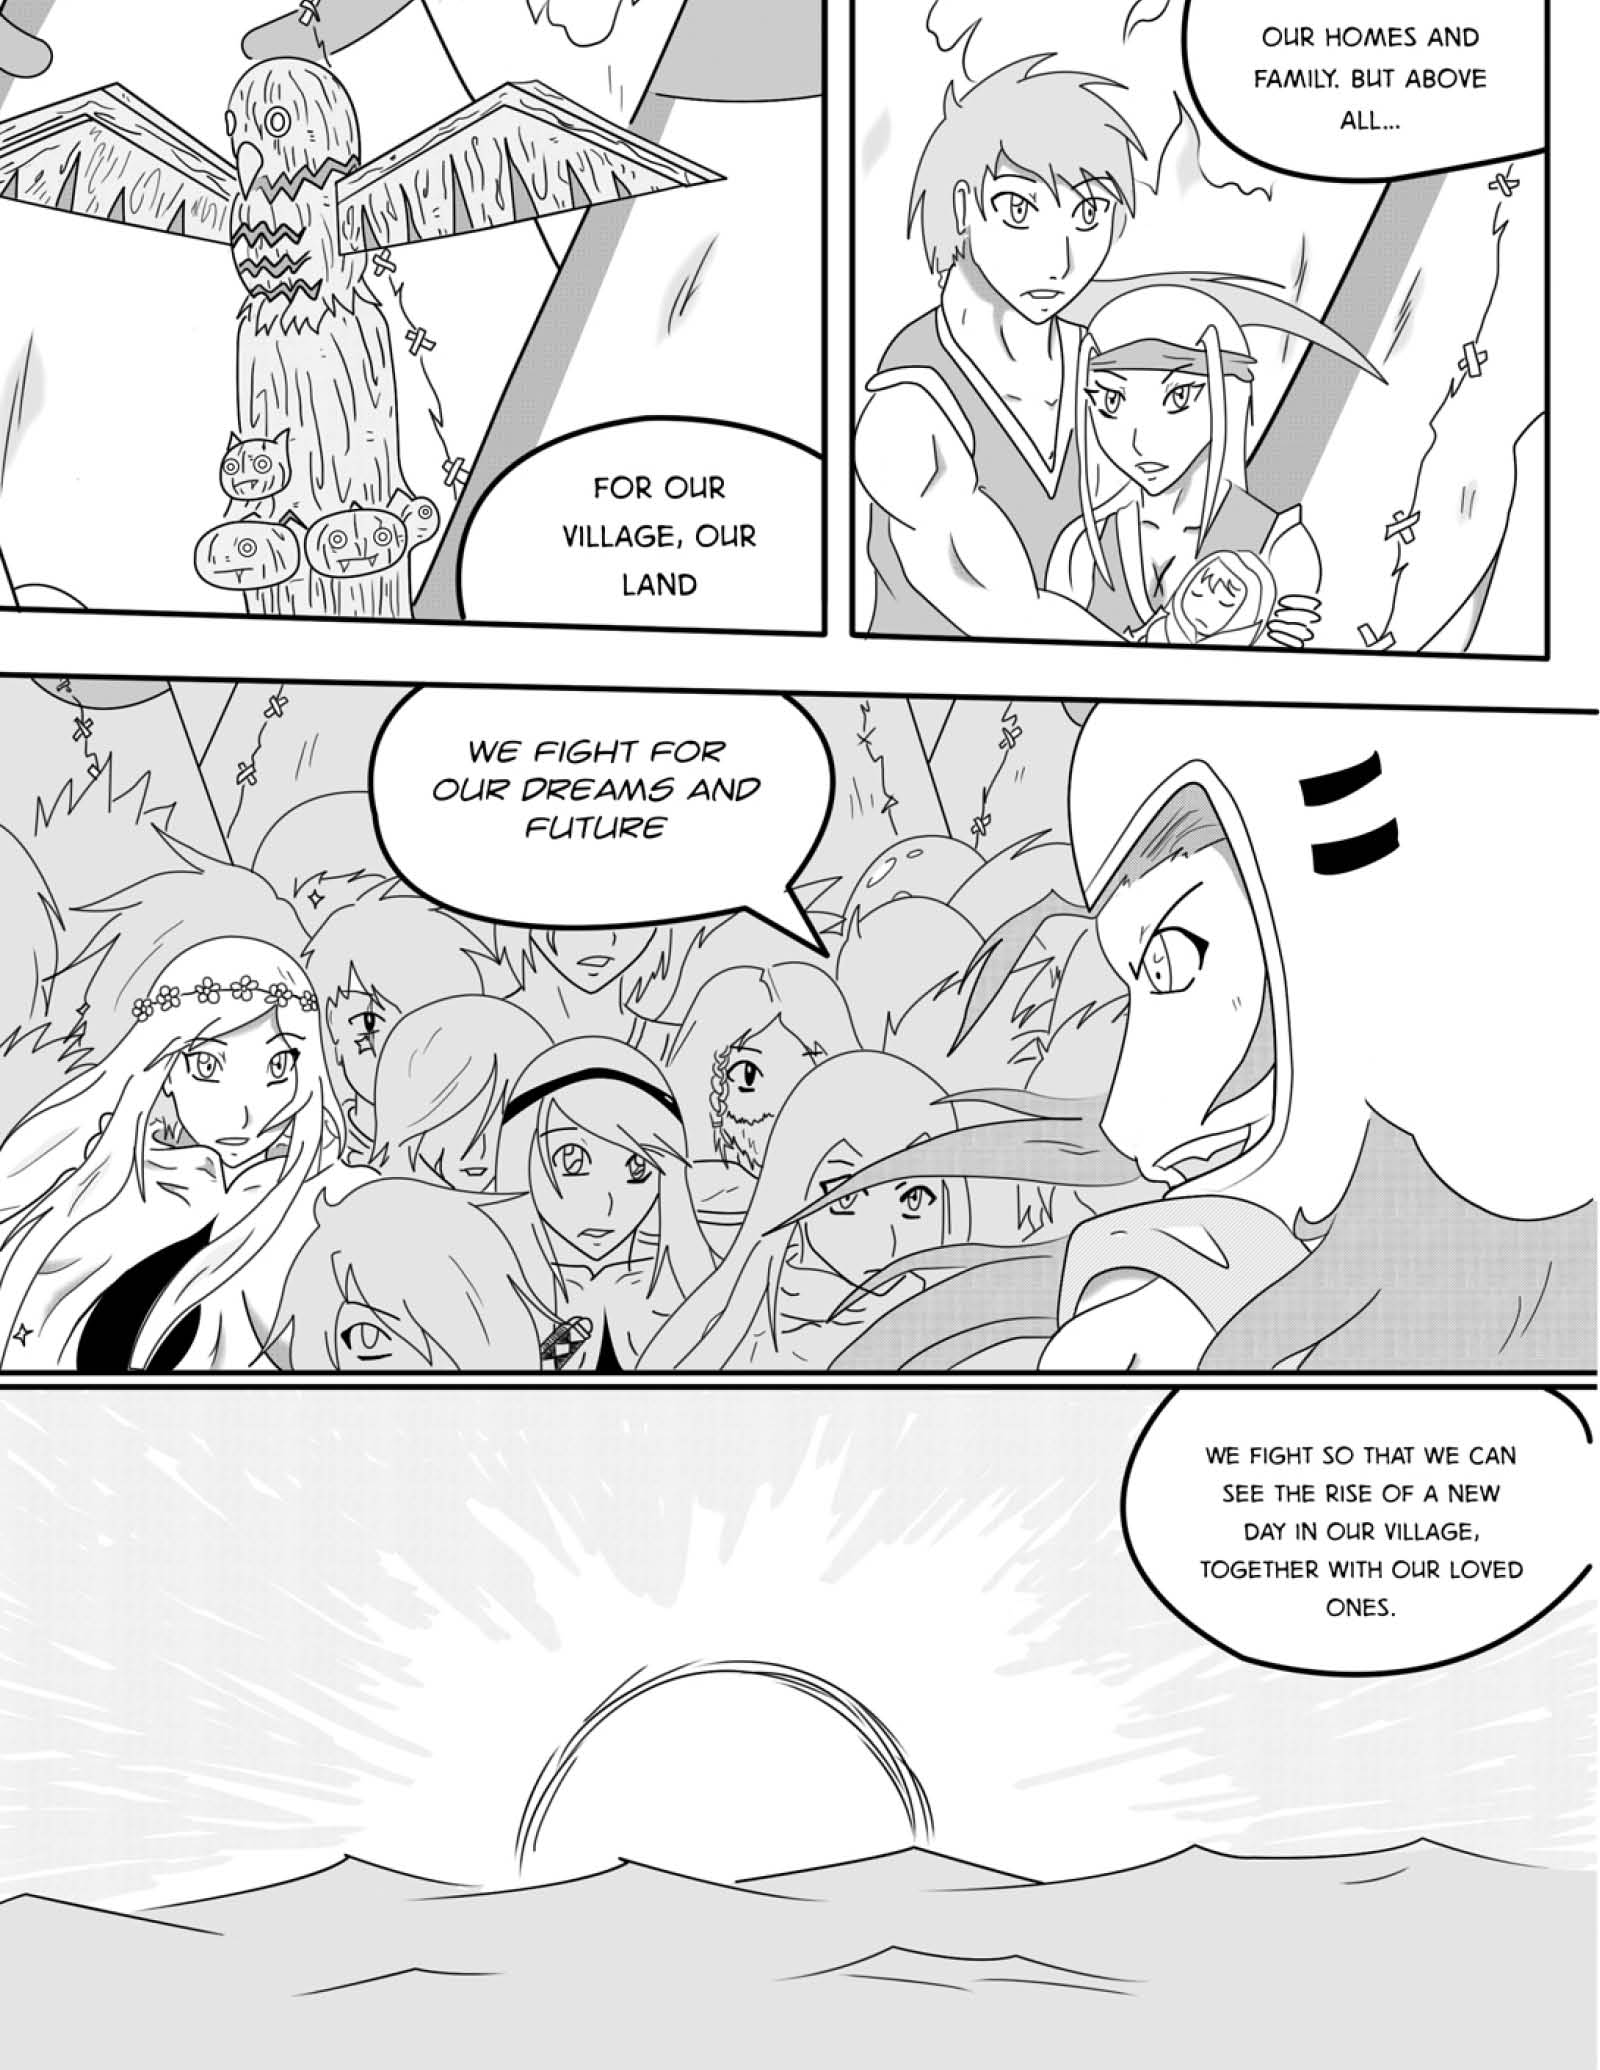 Series Dilan: the Chronicles of Covak - Chapter 1 - Page 39 - Language ENG